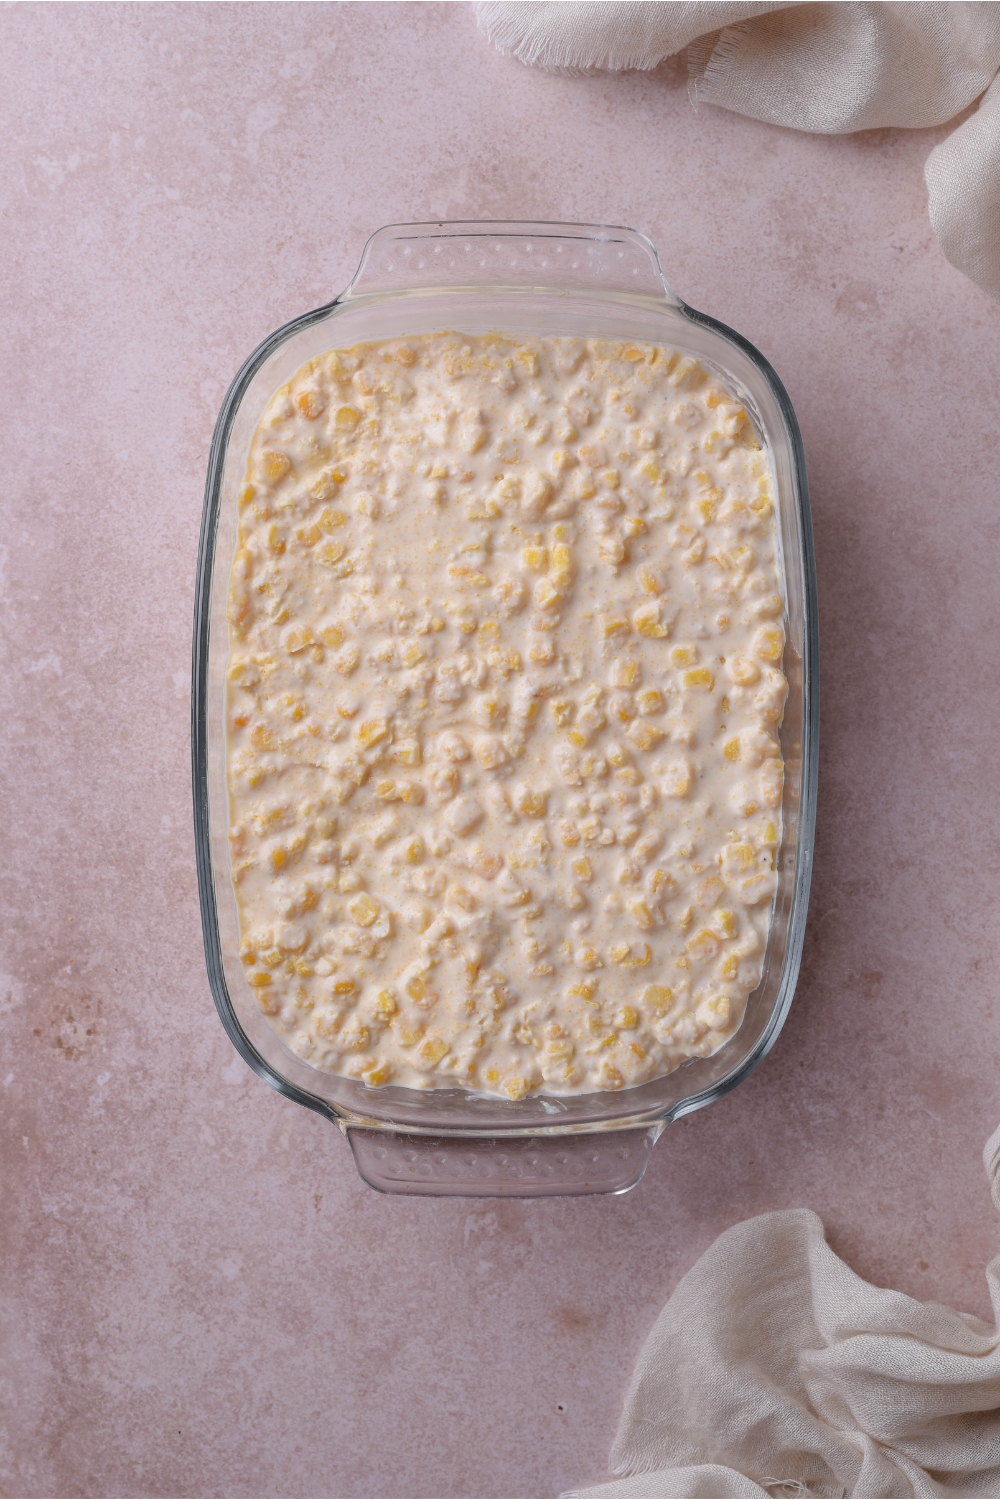 A baking dish filled with unbaked creamed corn casserole.